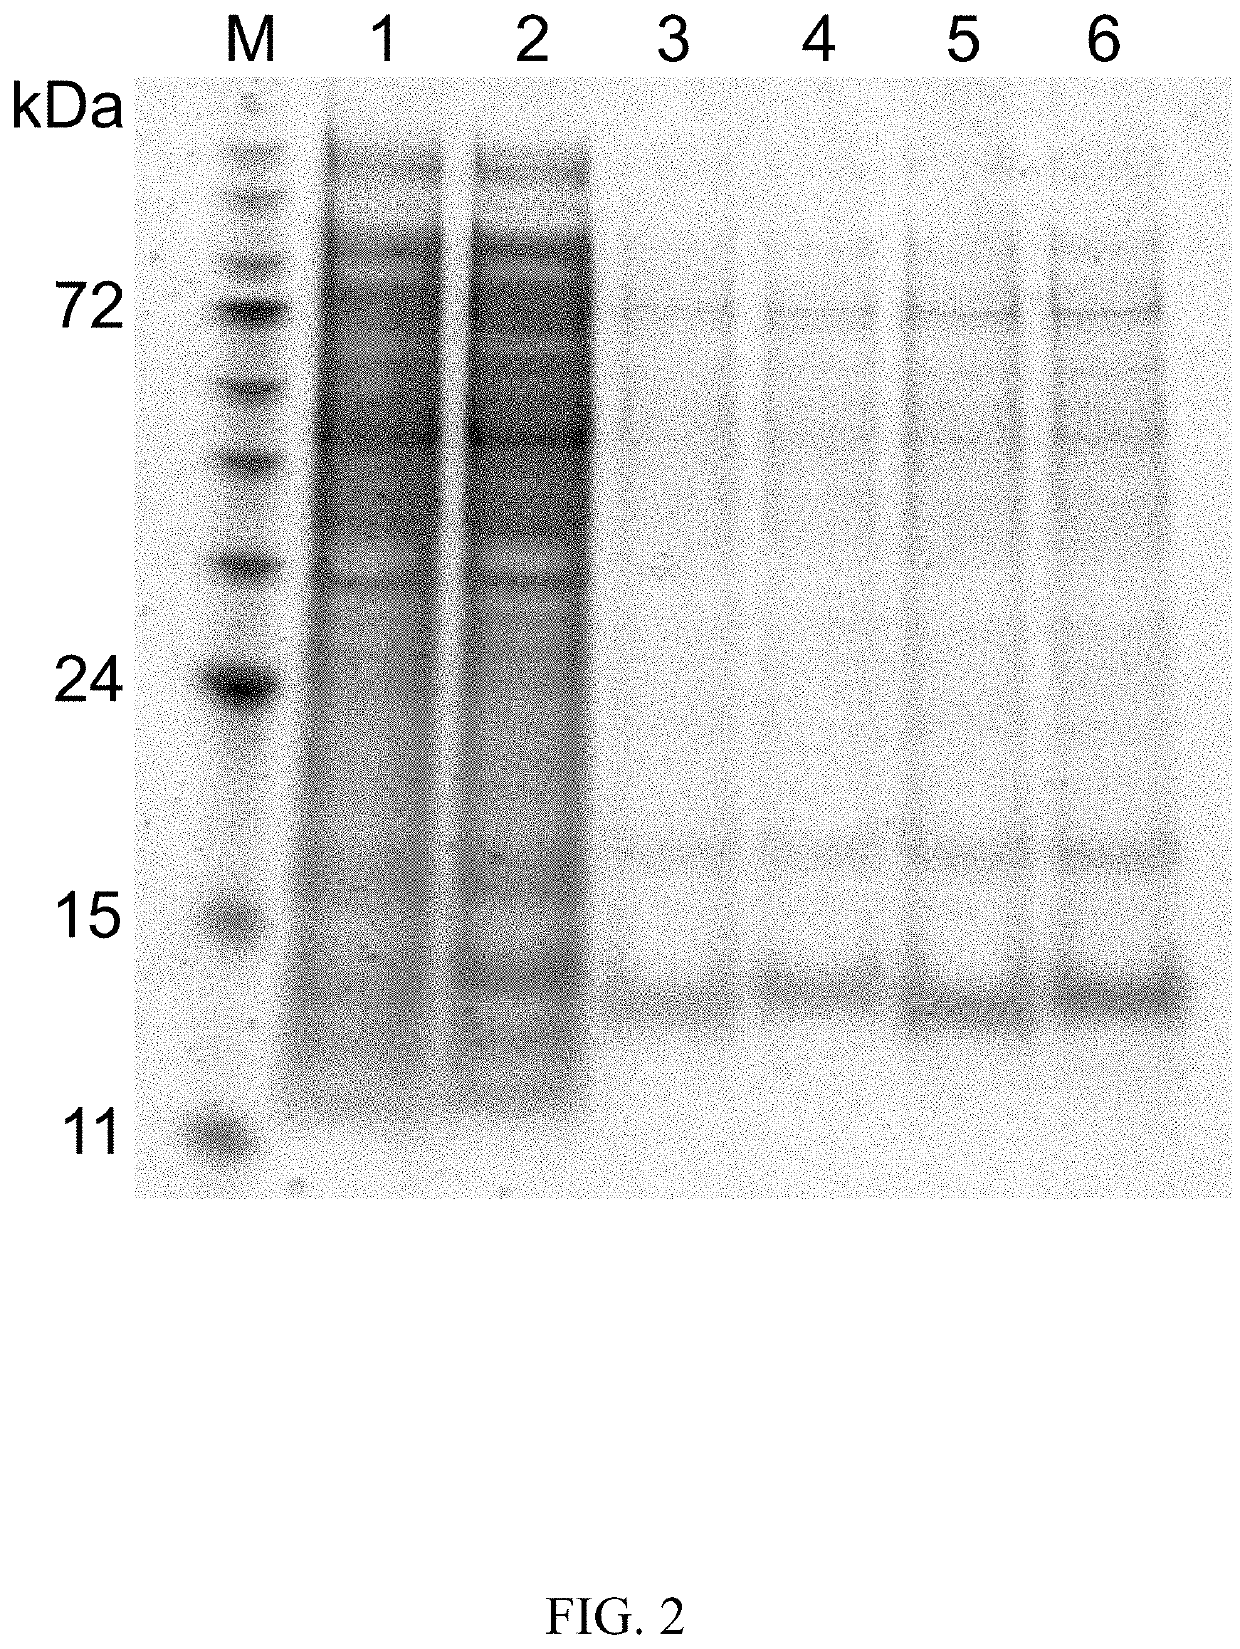 C-peptides and proinsulin polypeptides comprising the same